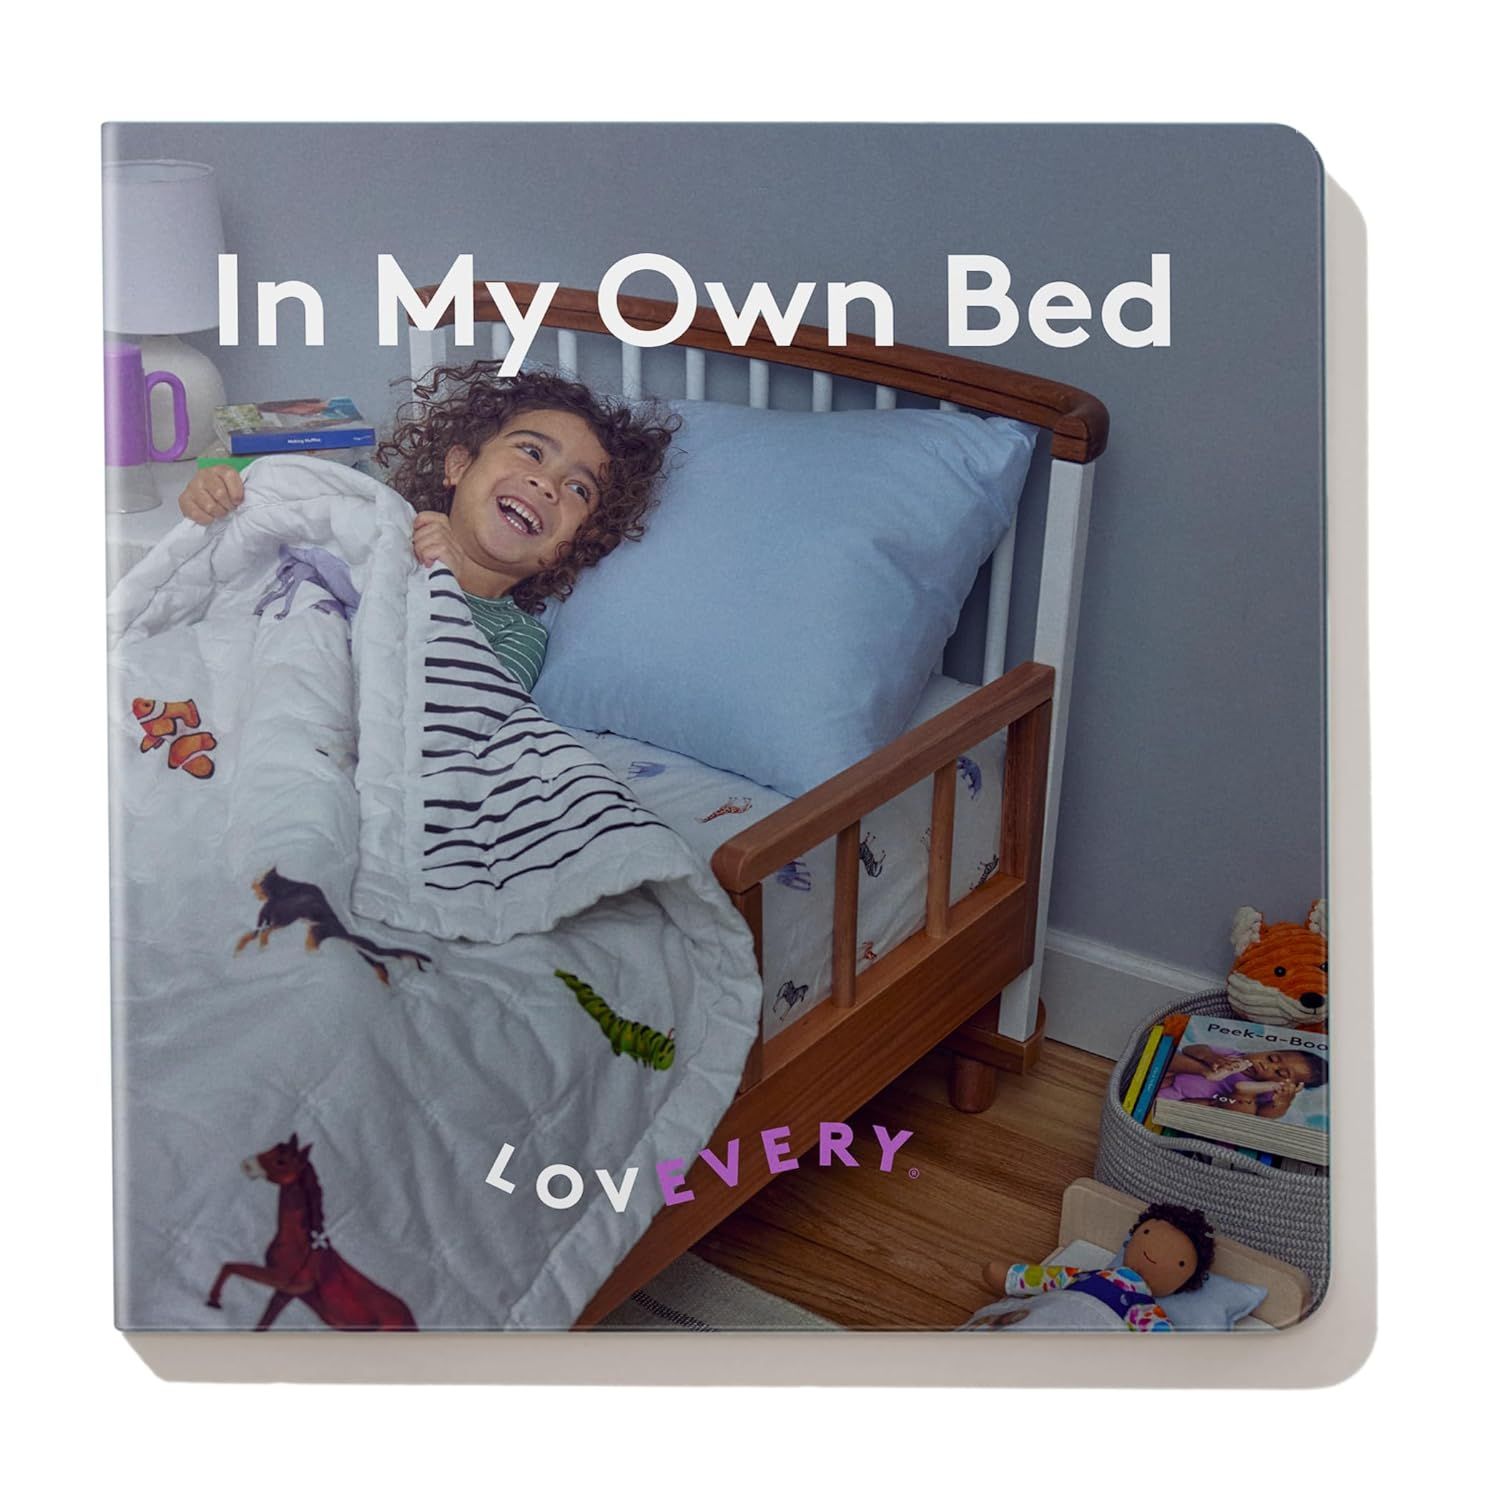 Cover of In My Own Bed by Lovevery Books